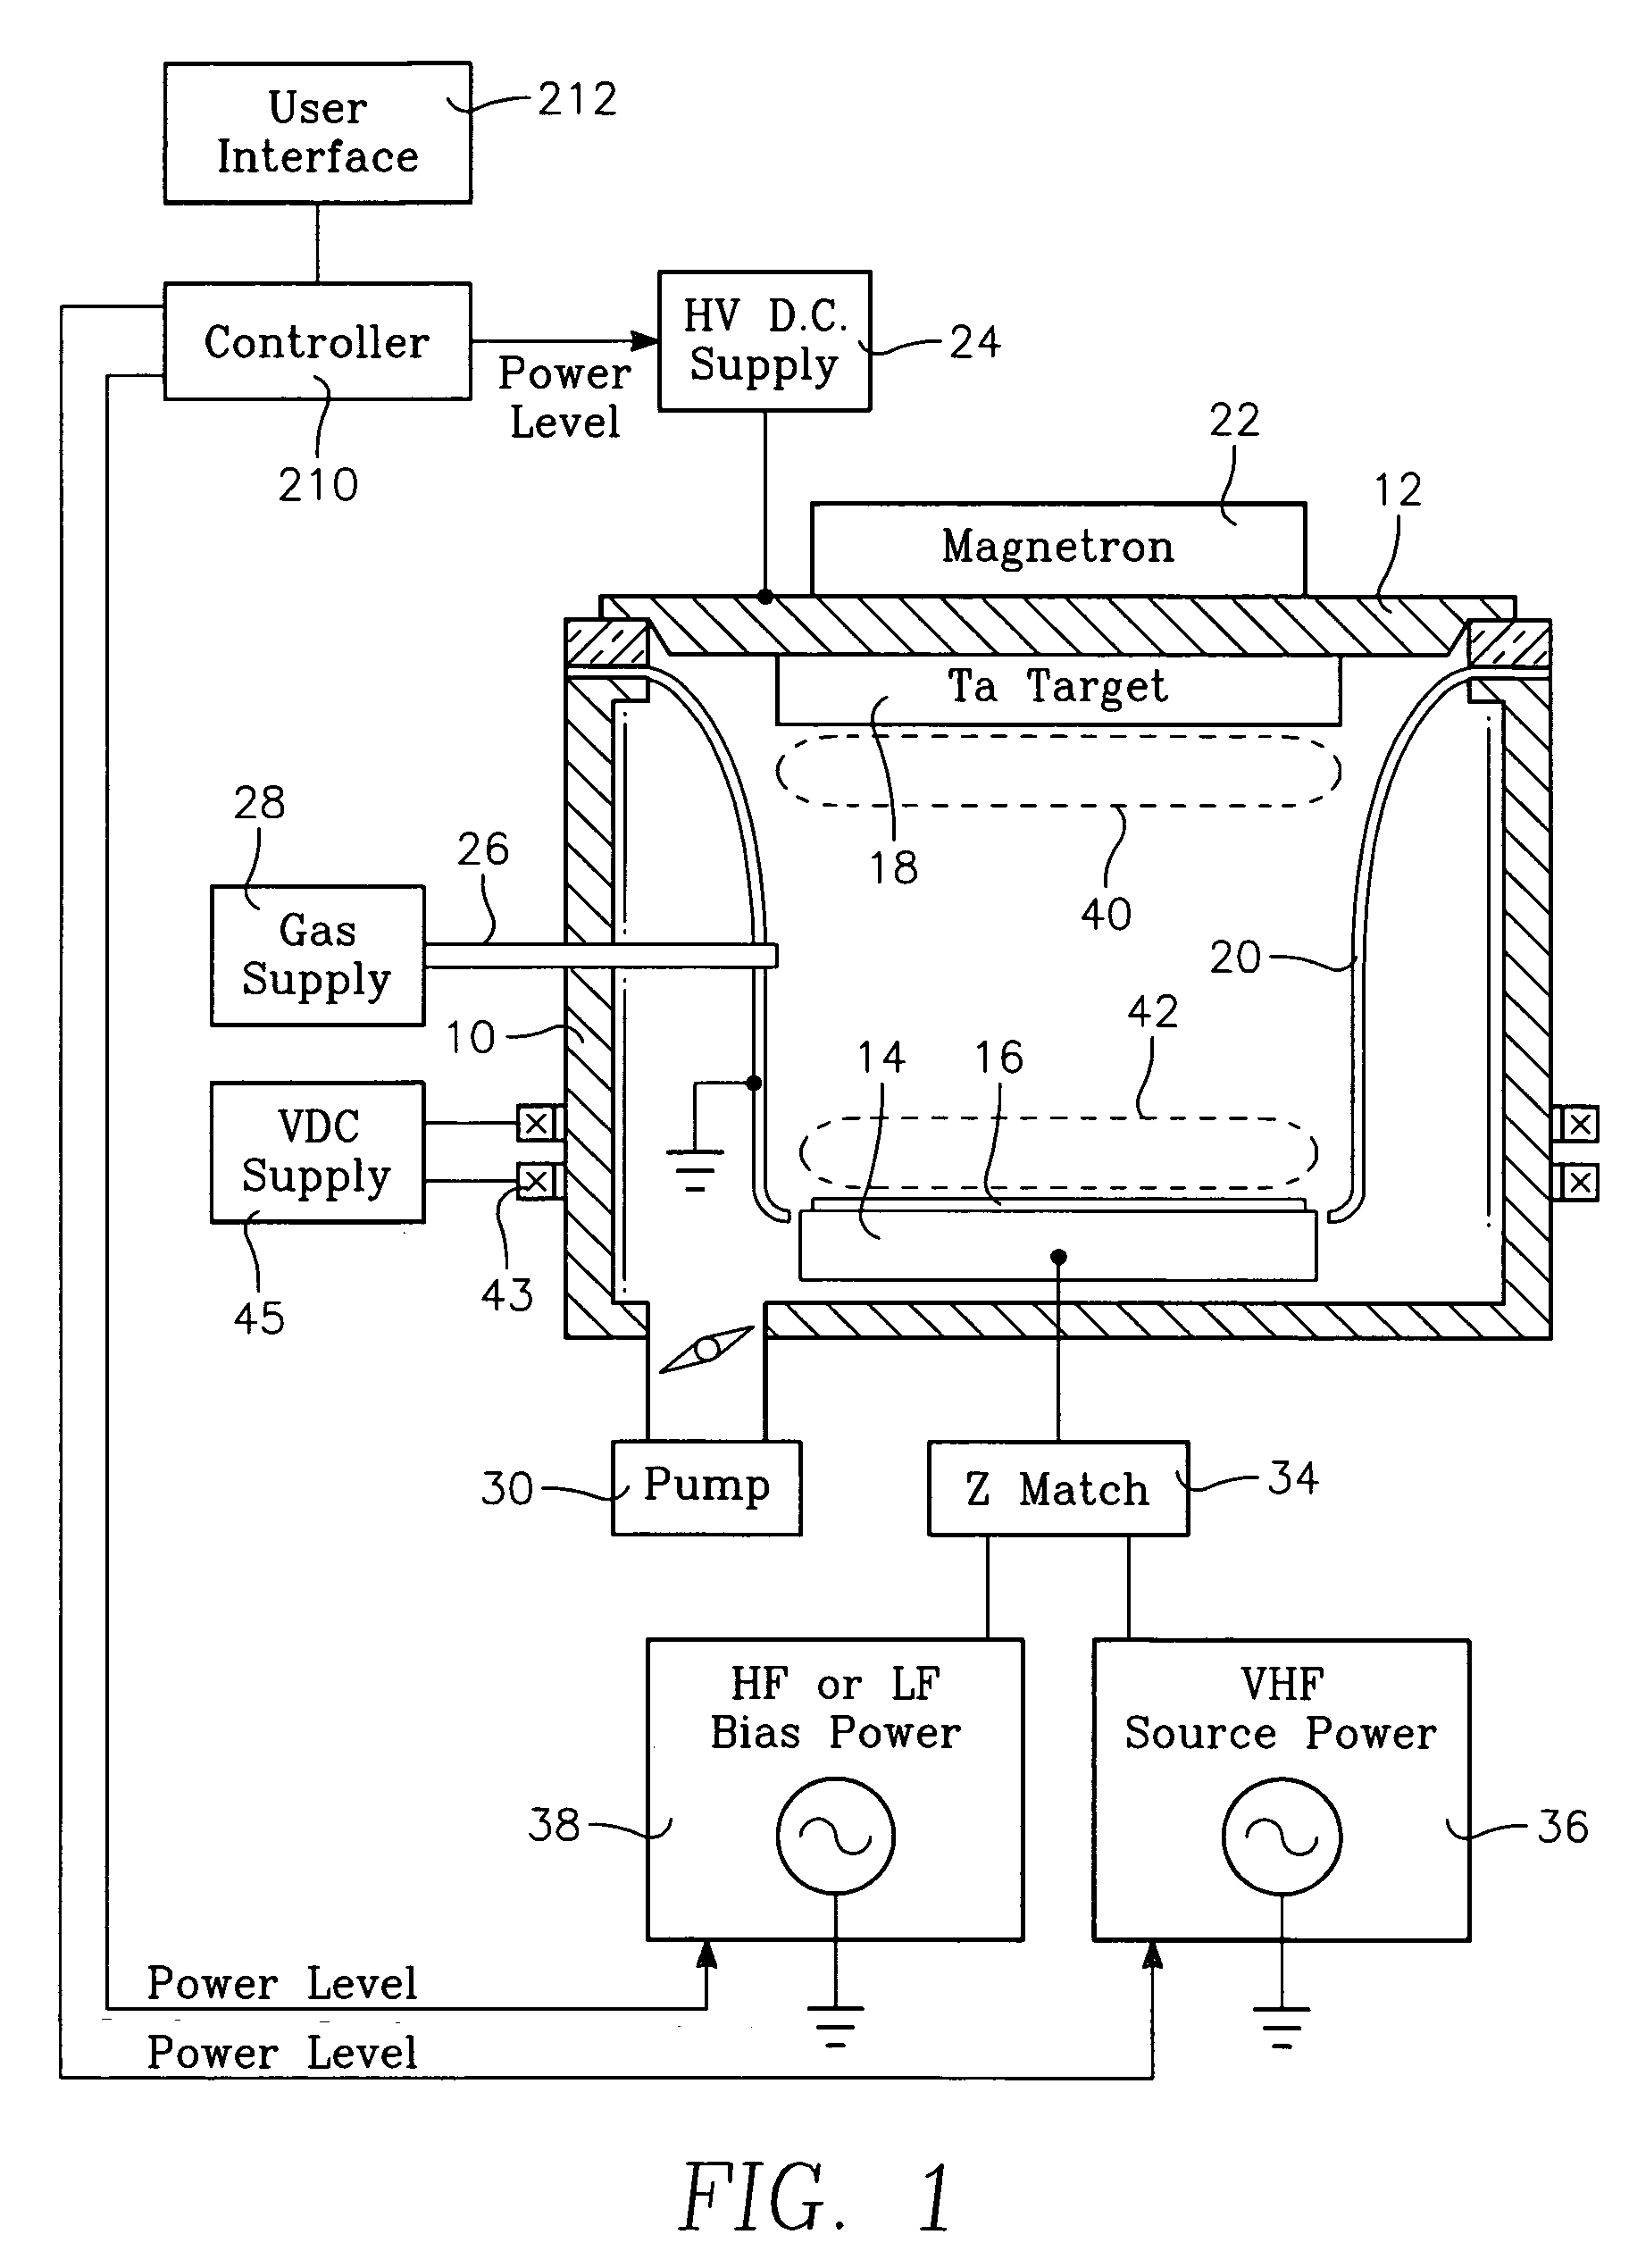 Physical vapor deposition plasma reactor with RF source power applied to the target and having a magnetron